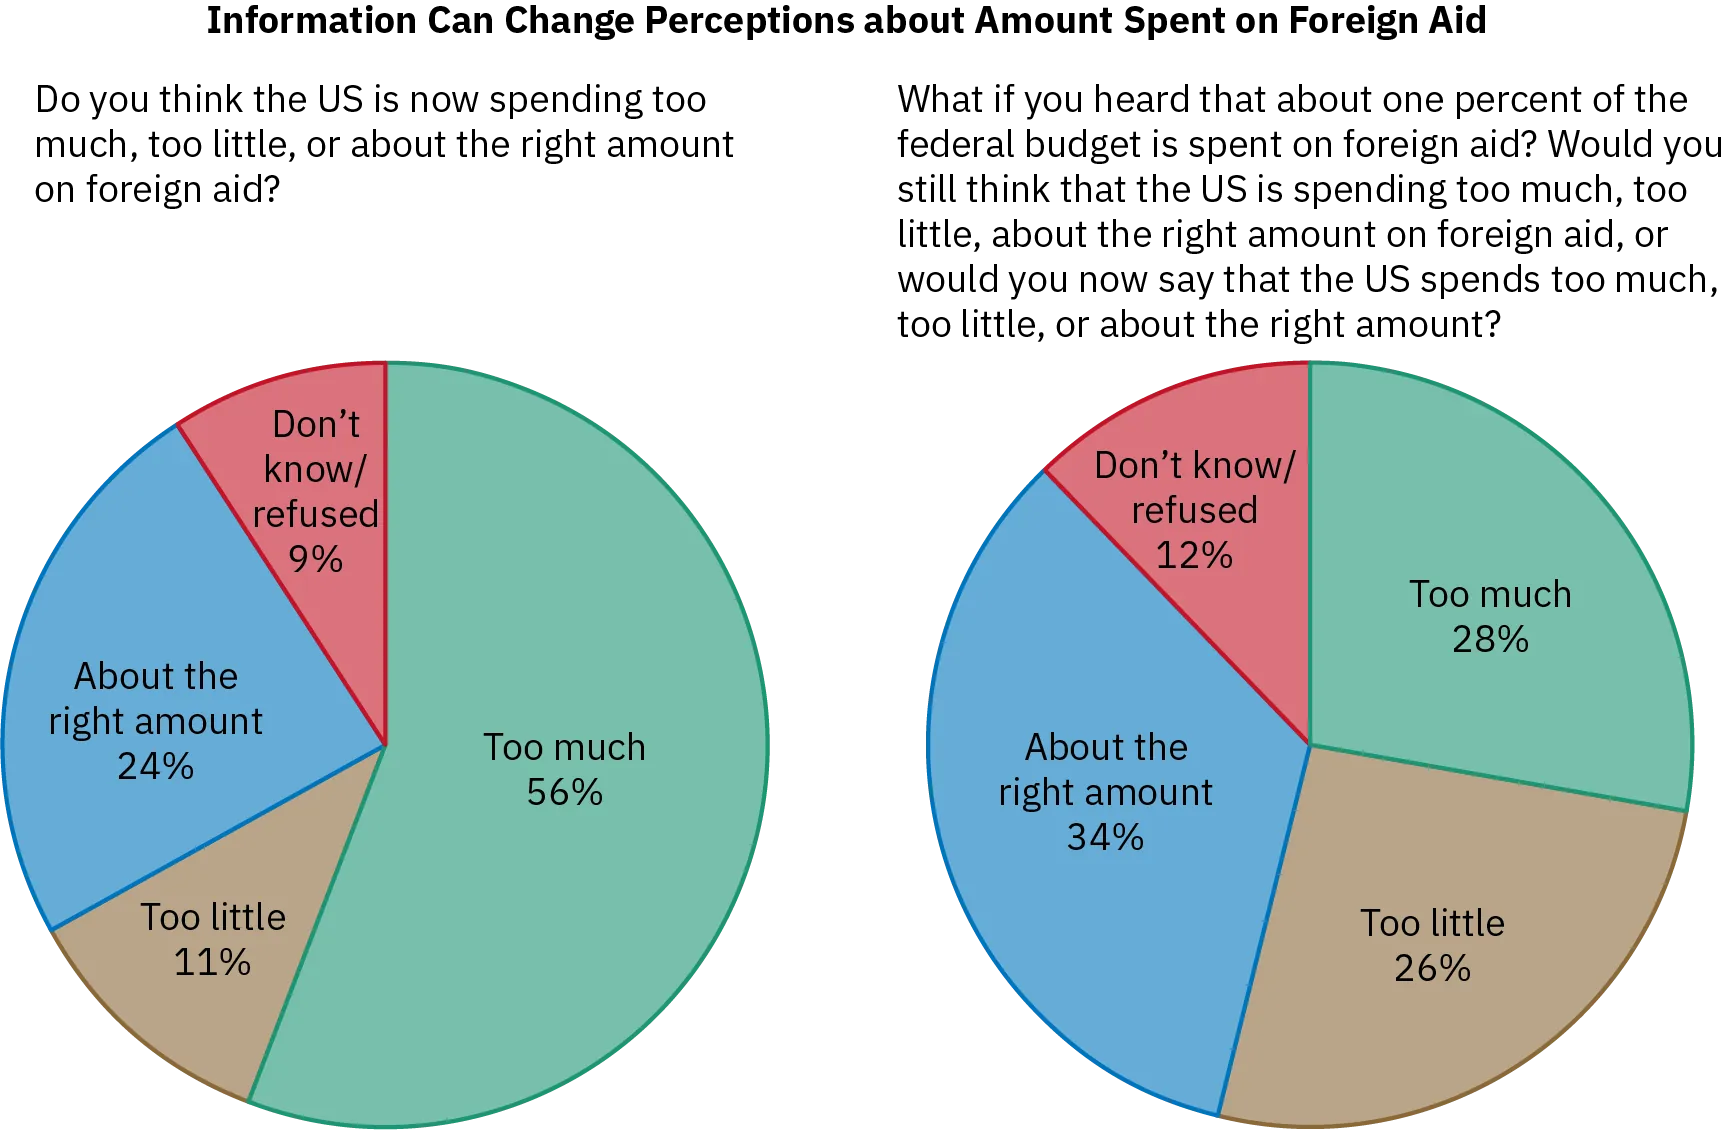 Two pie-charts show that, when given more information, respondents were half as likely to say levels of US foreign aid were too high and 10-15% more likely to say they were about right or too low.